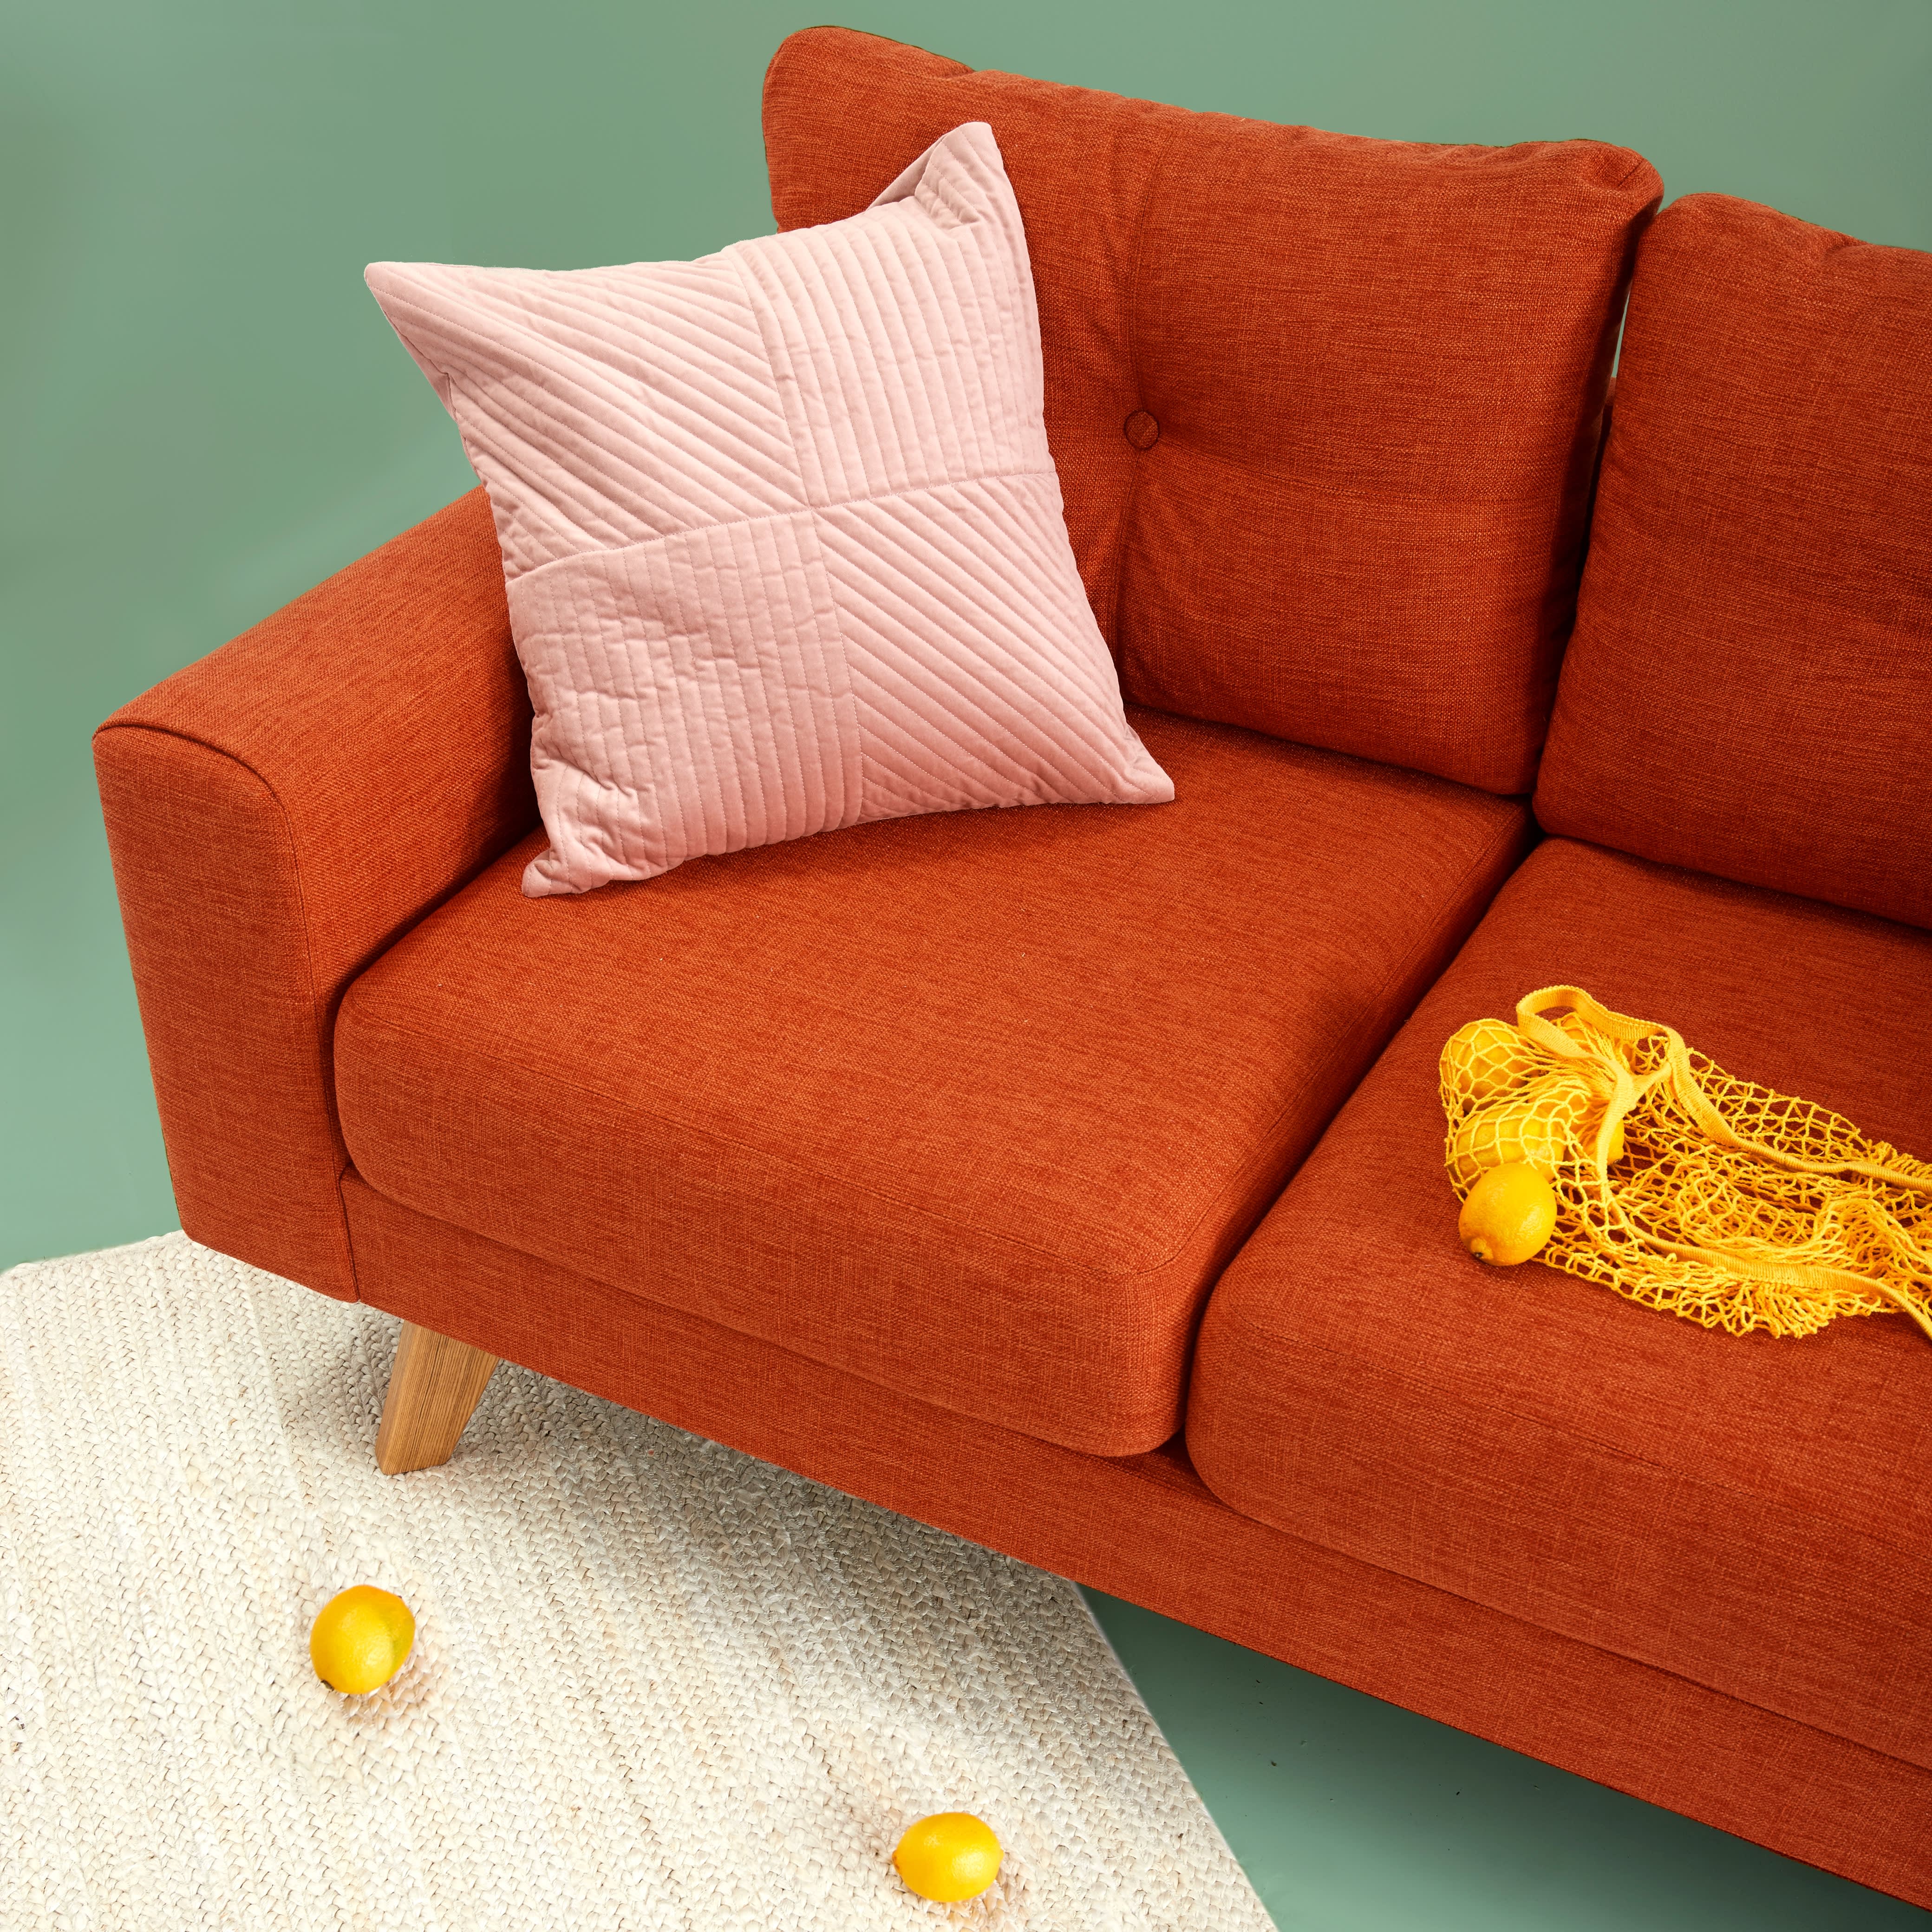 How to Clean and Disinfect a Couch  Apartment Therapy